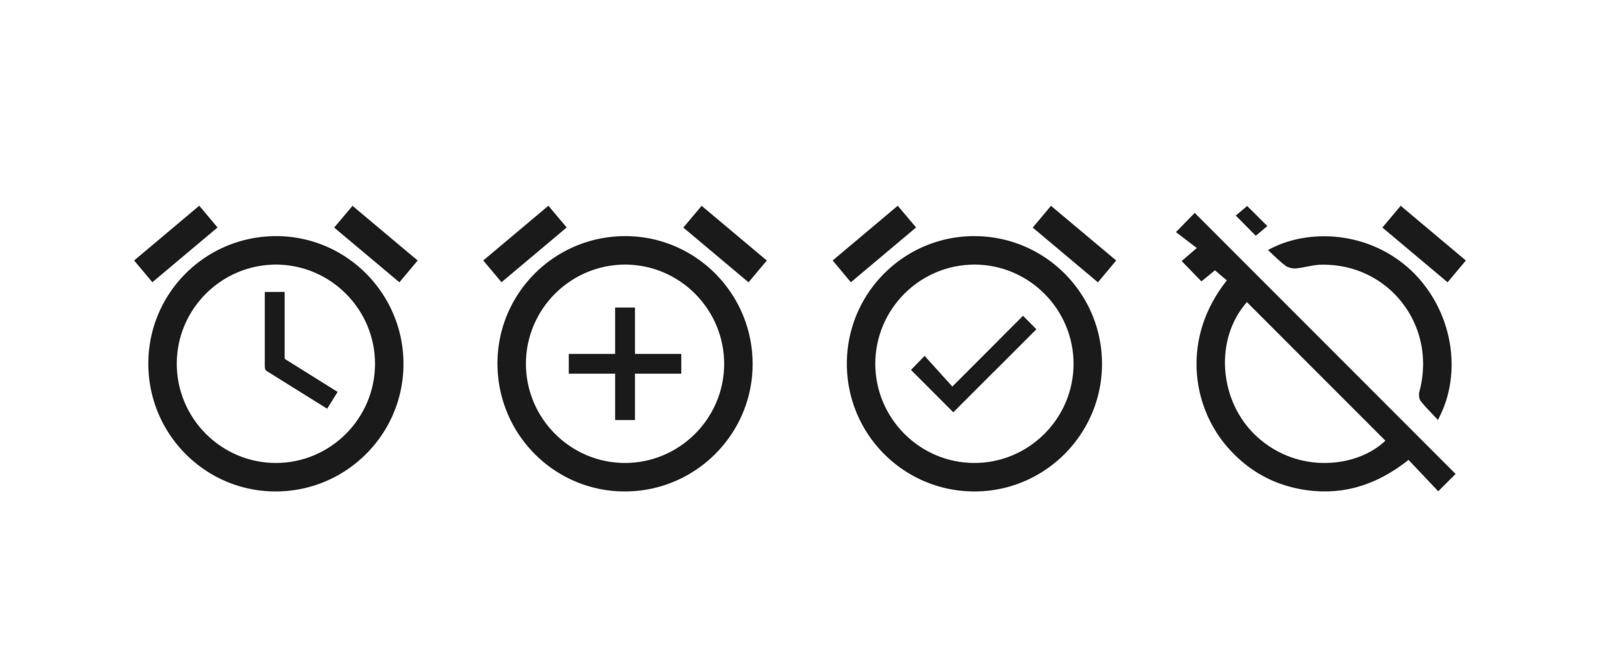 Alarm clock or stopwatch icons set. Set or turn off the alarm Vector illustration EPS10